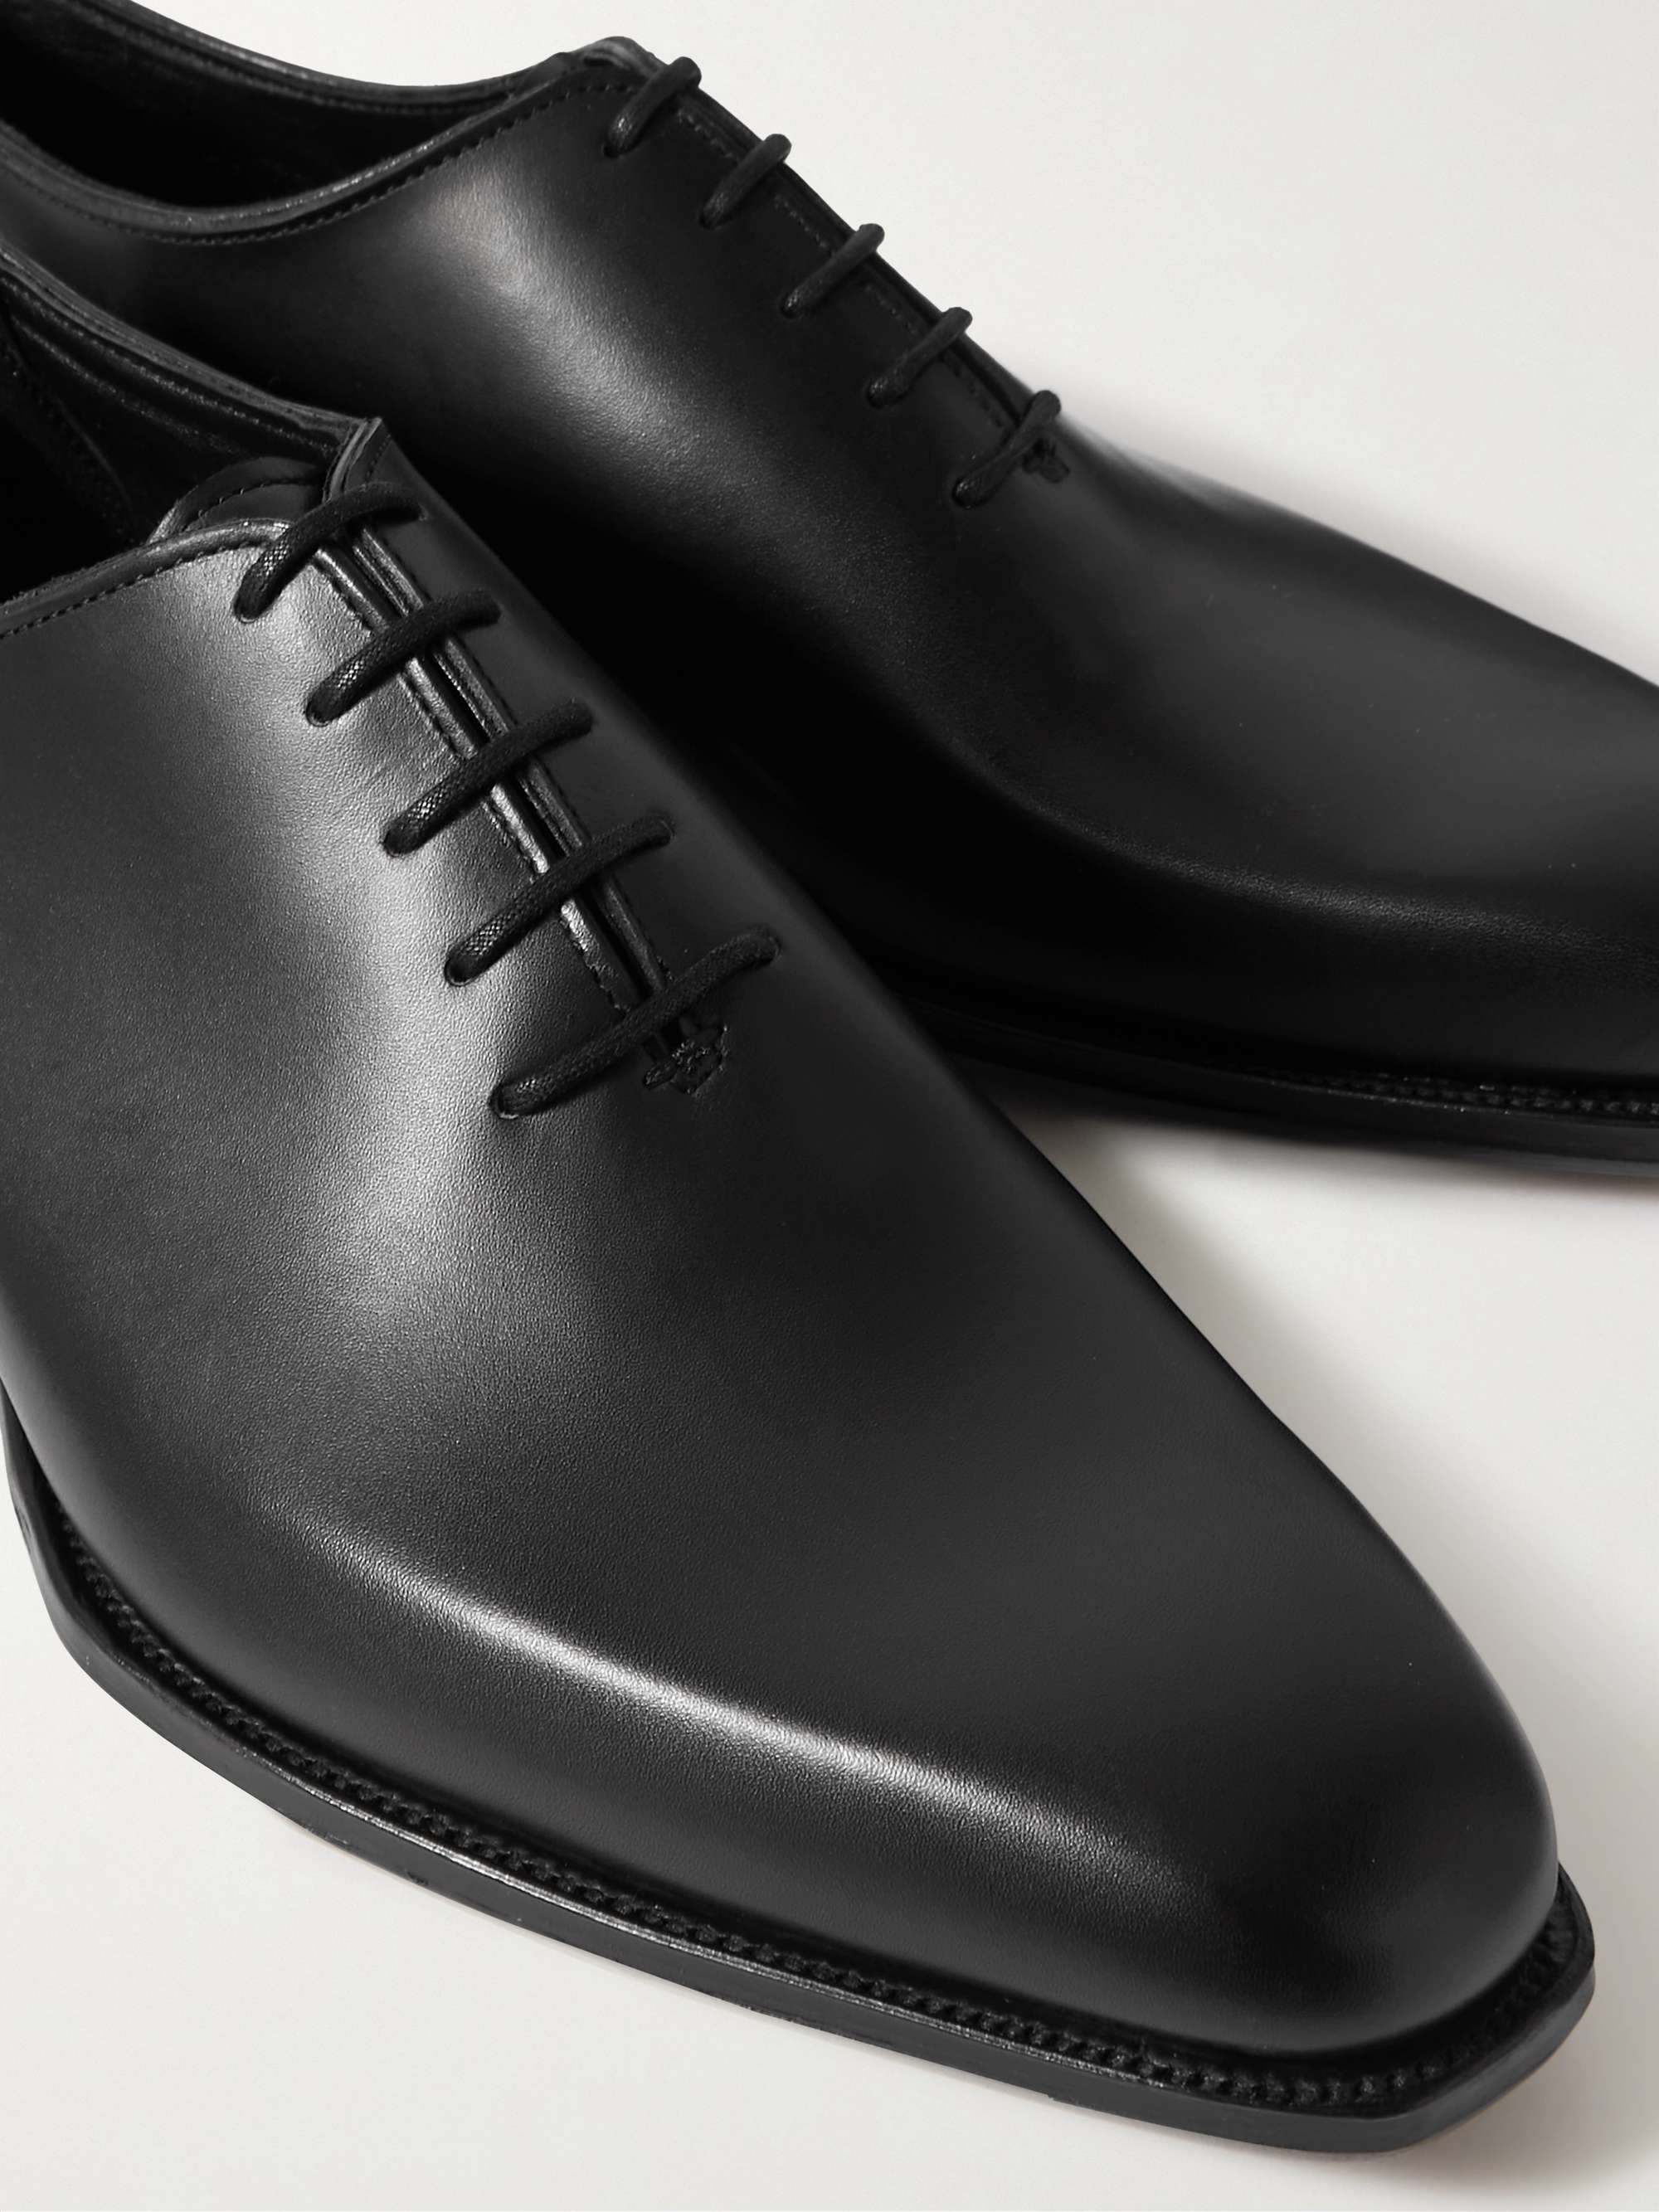 GEORGE CLEVERLEY Merlin Leather Oxford Shoes | MR PORTER